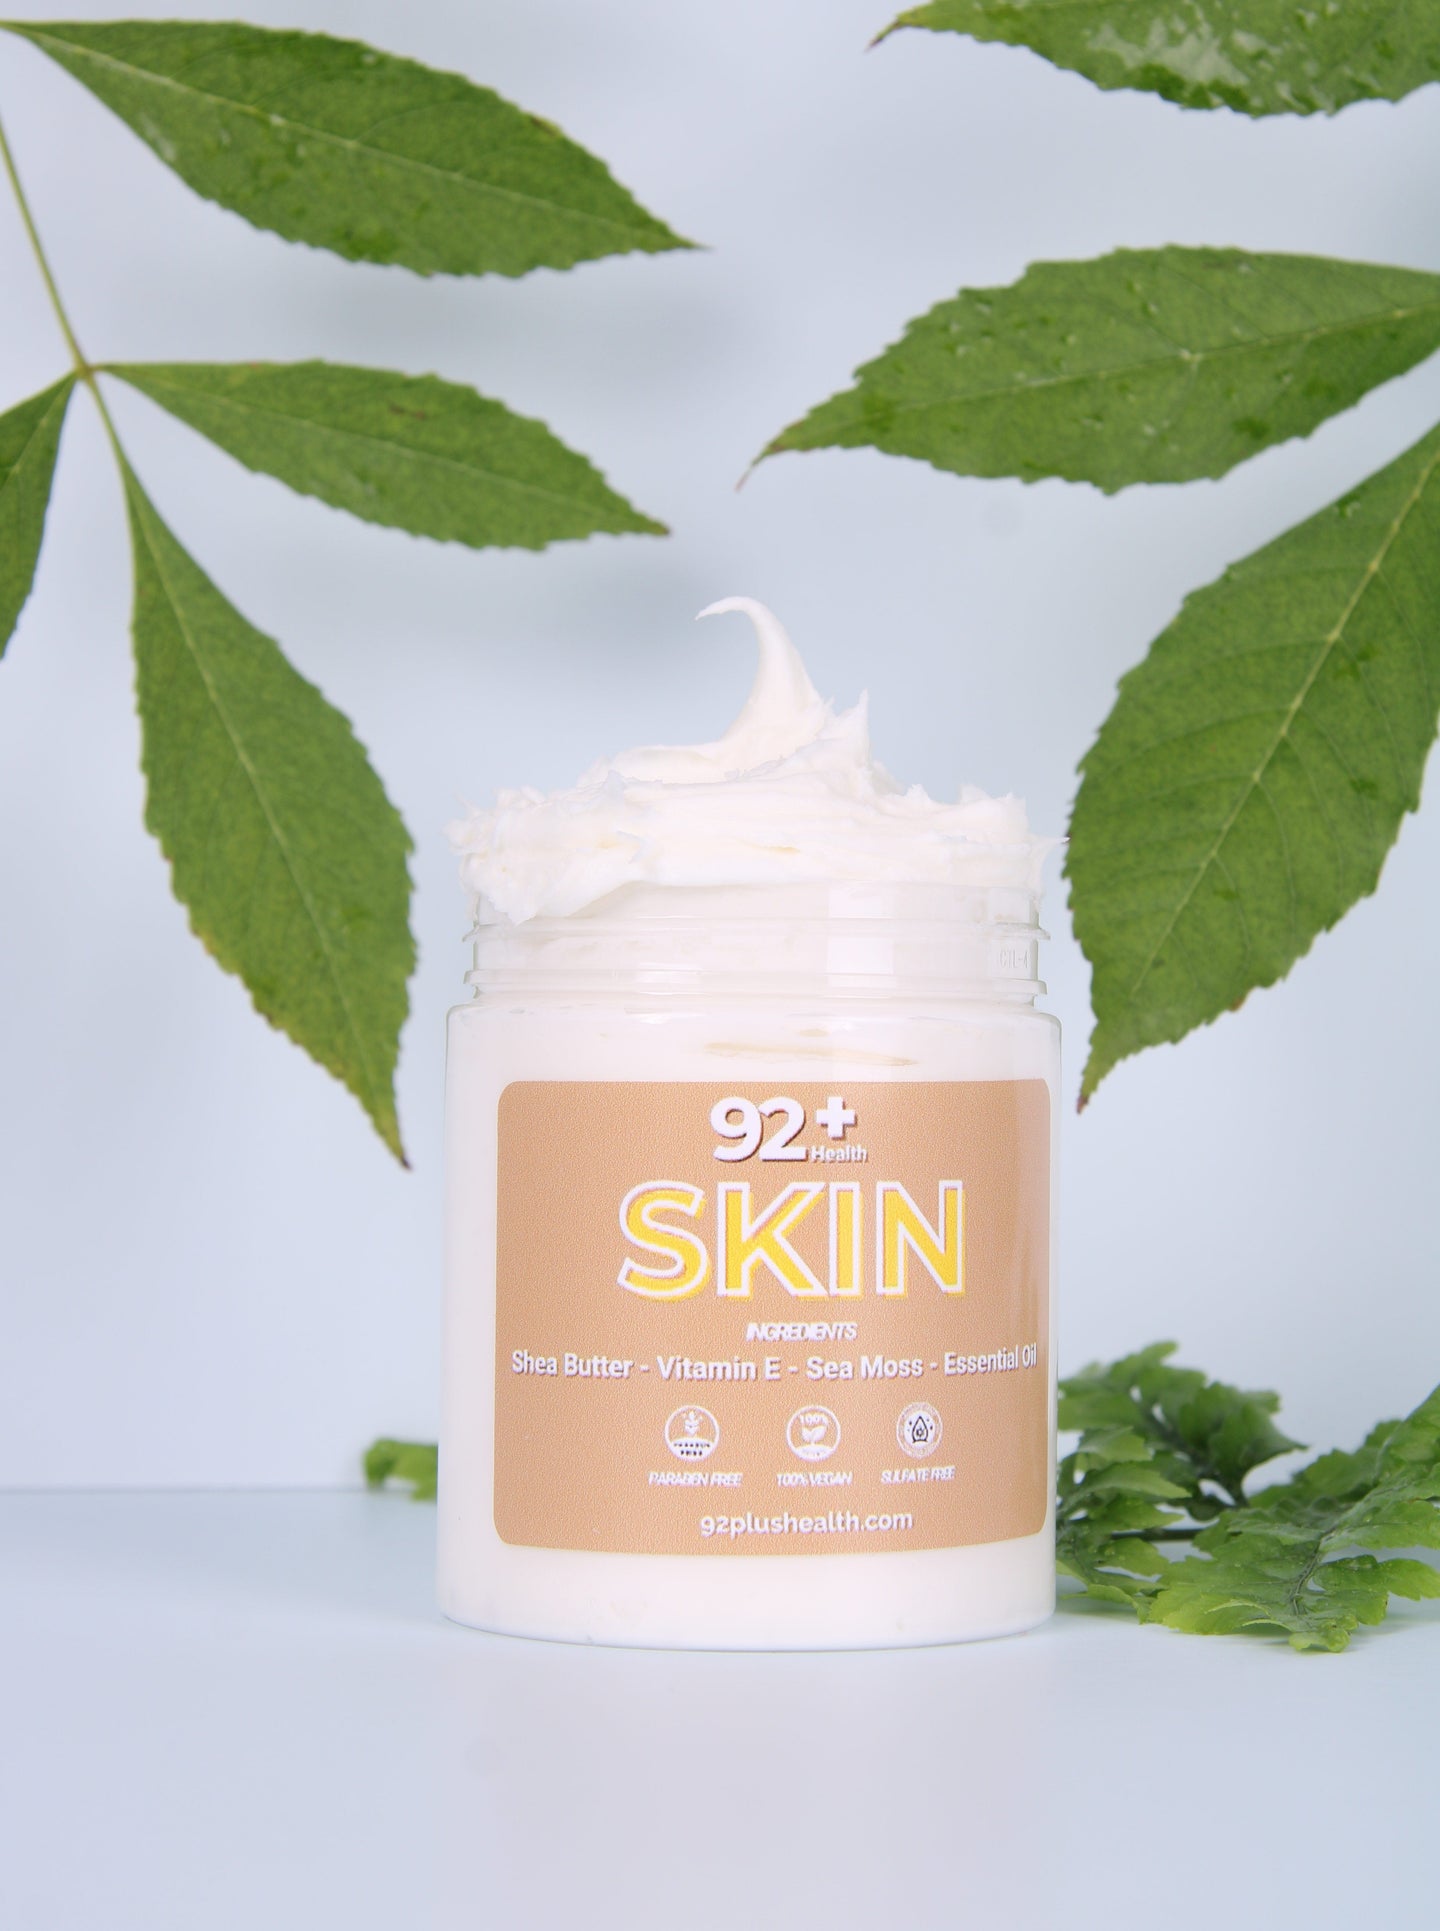 92+ Body Butter - Sea Moss, Vitamin E, Essential Oils, Sea Butter, Mango Butter. A thick rich sea moss lotion that helps with dry skin and eczema. 92+ Health, Everything Sea Moss.  The #1 Sea Moss provider in Los Angeles. sea moss body butter